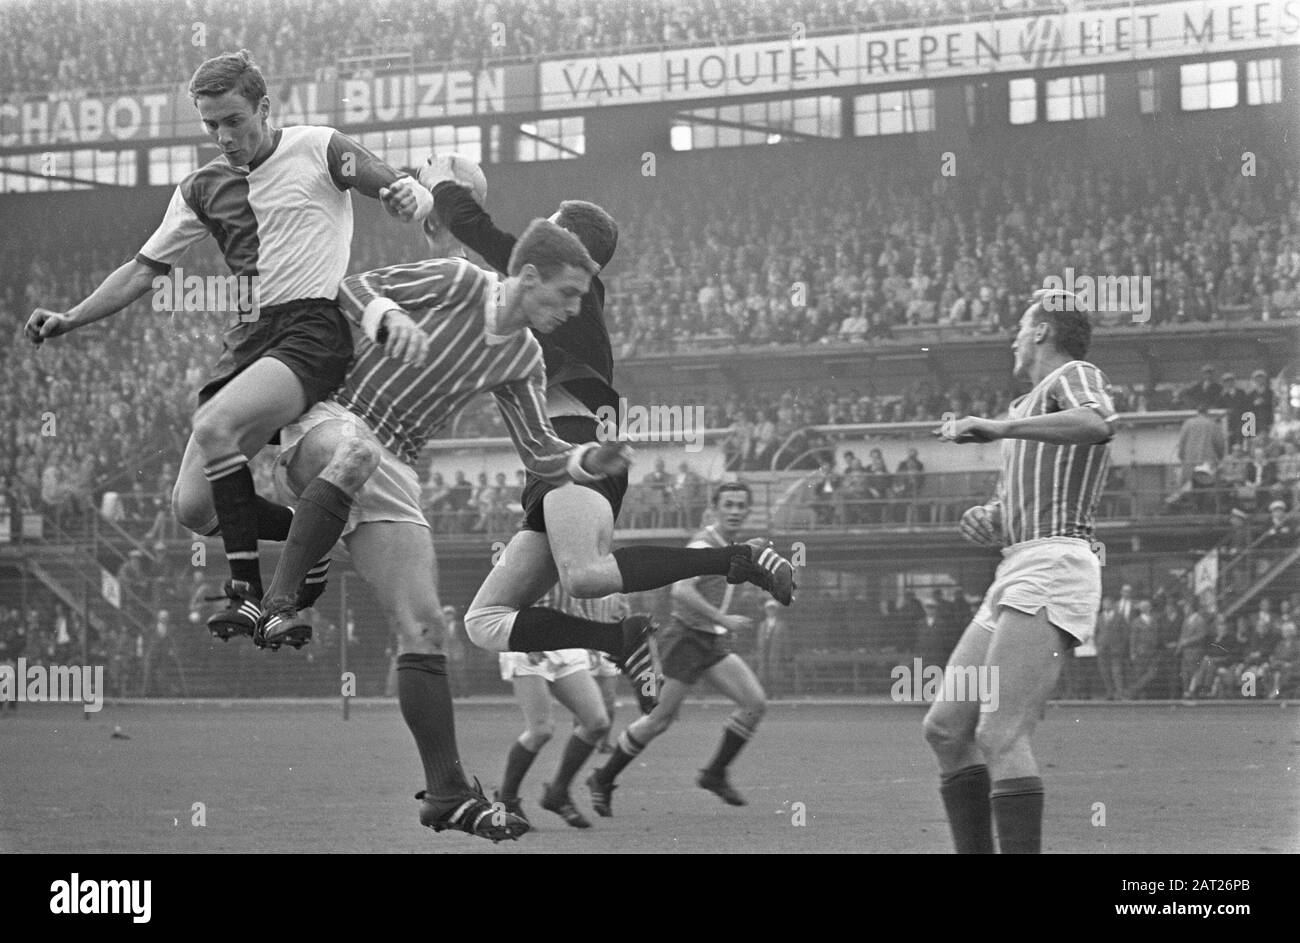 Feyenoord against Fortuna 54 6-0. goalkeeper Winge in duel with Kindvall Date: September 17, 1967 Keywords: duels, sport, football Personal name: Kindvall, Ove Institution name: Feyenoord, Fortuna 54 Stock Photo